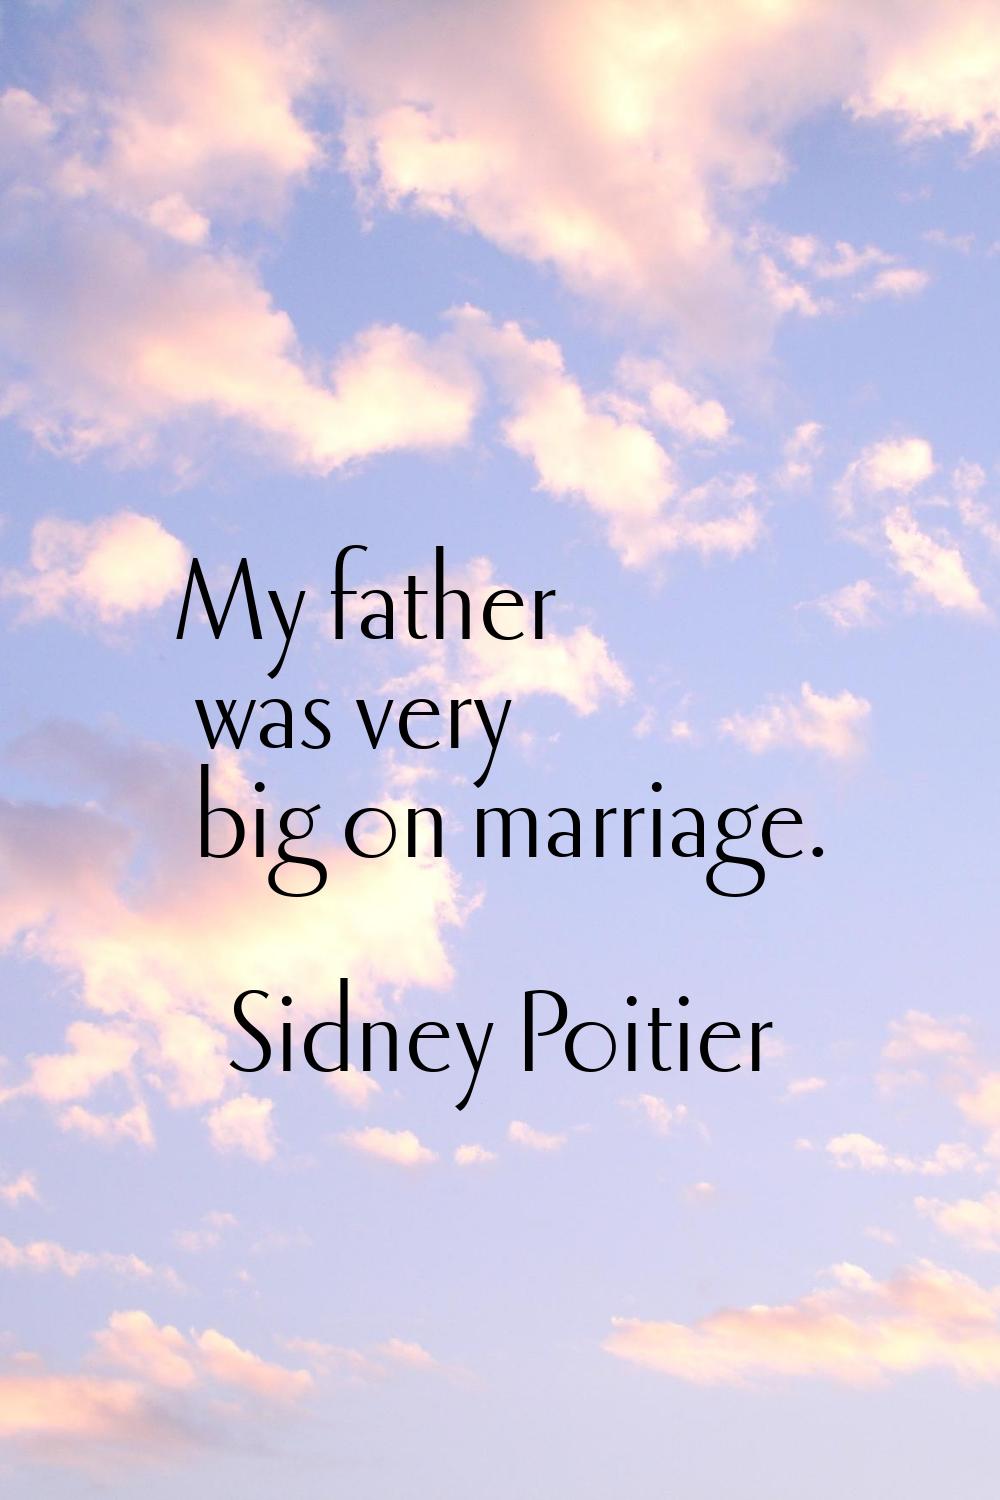 My father was very big on marriage.